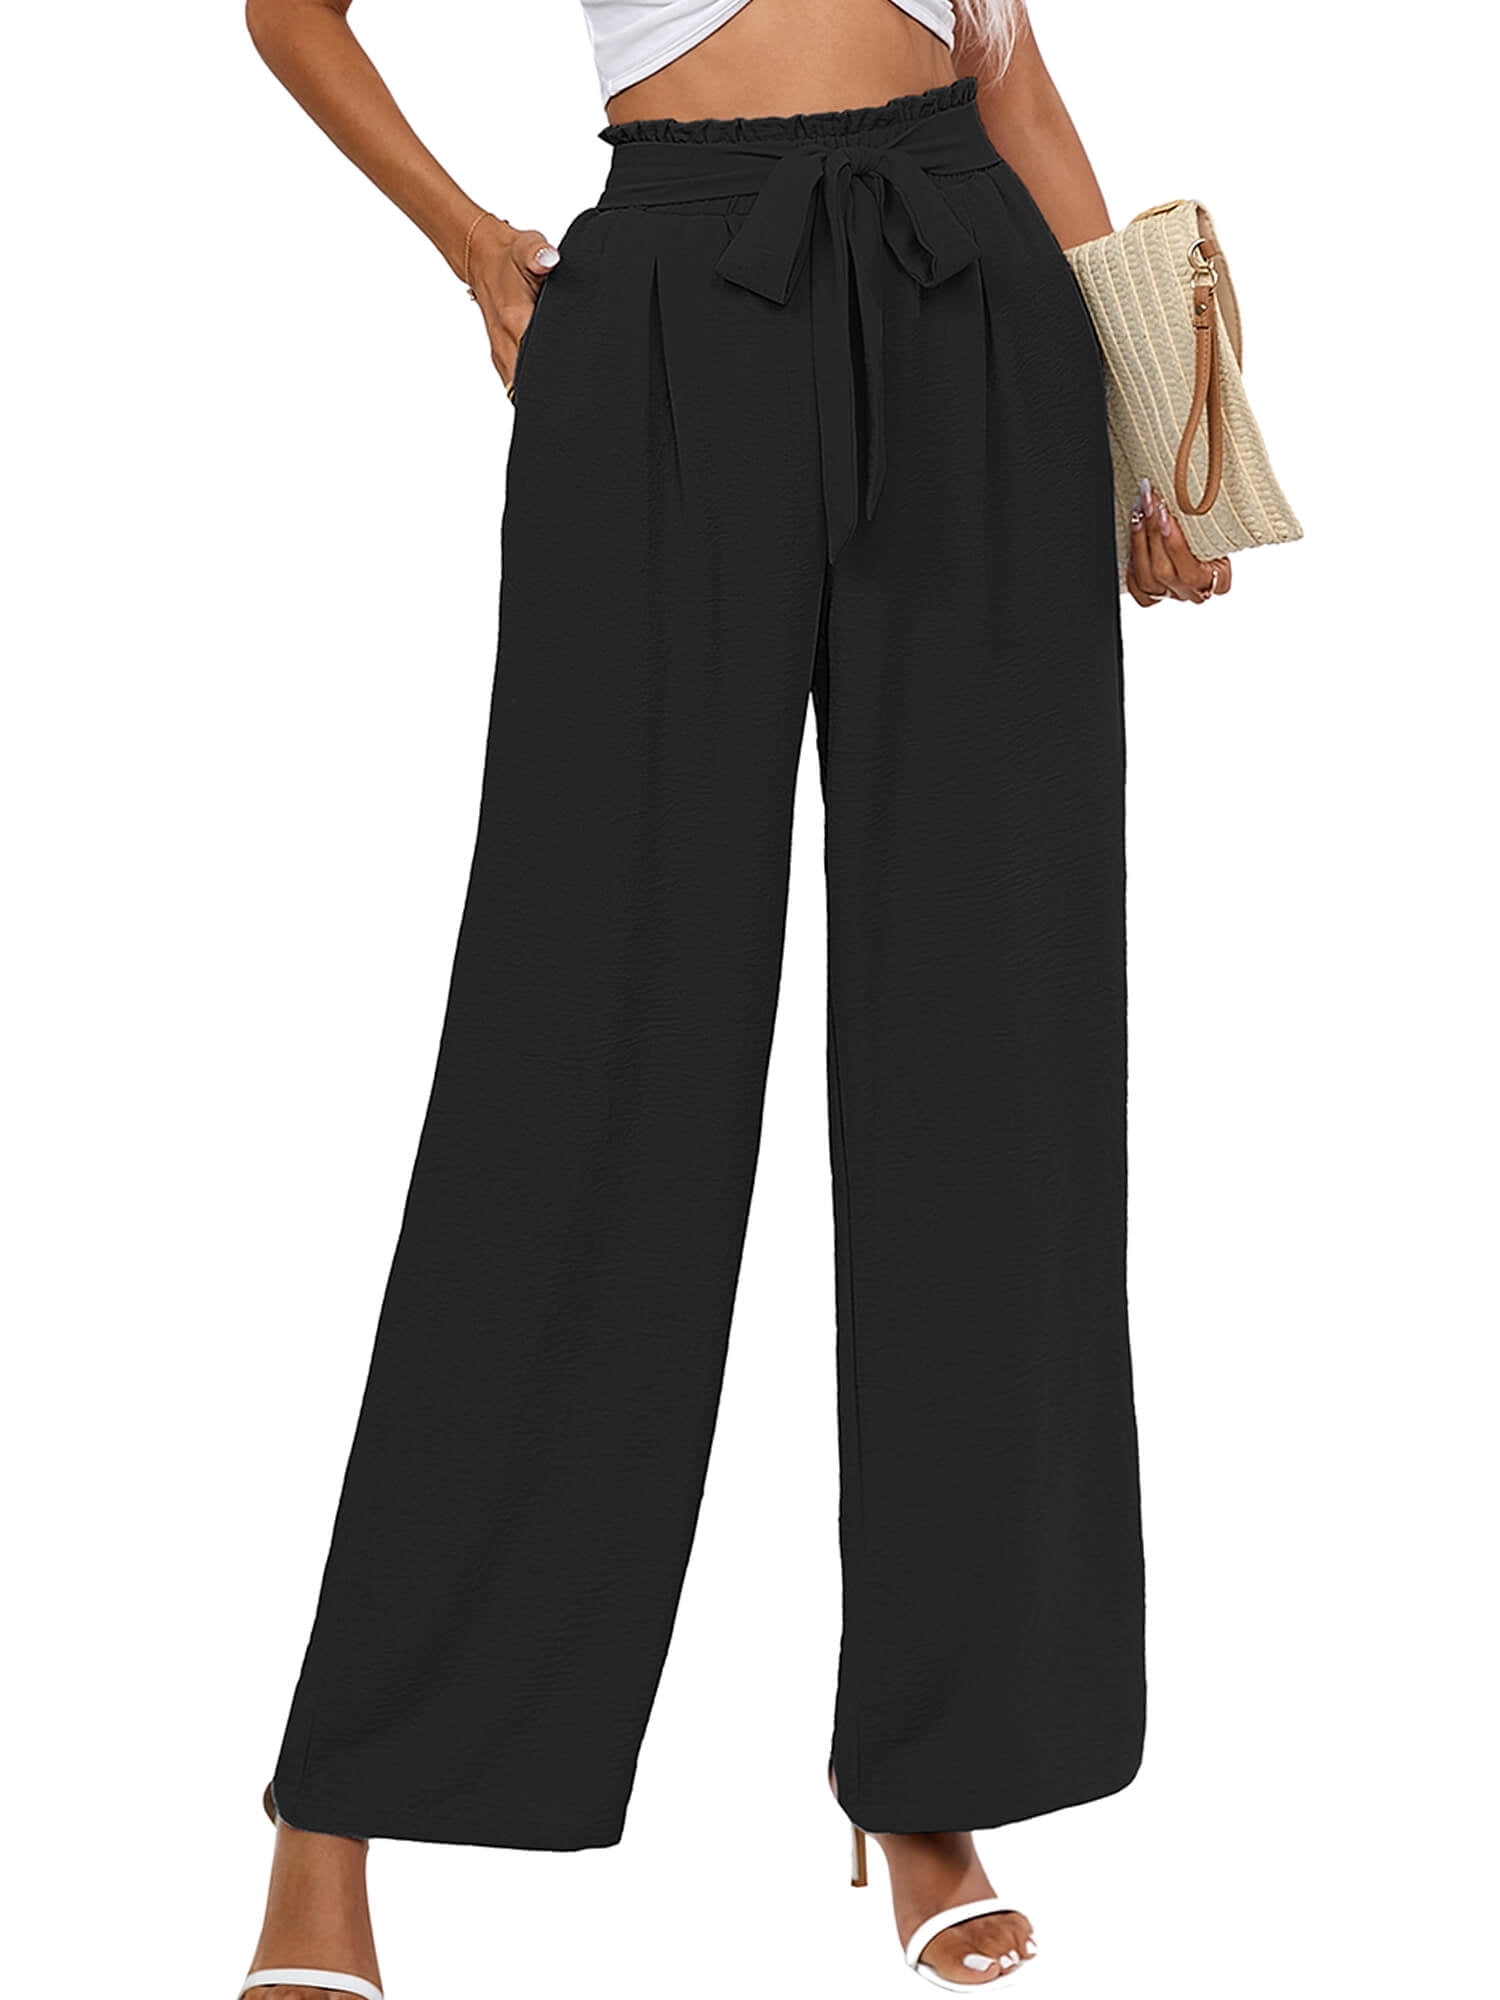  Business Casual Pants for Women Linen Wide Leg Pants for Women  High Waisted Loose Fit Drawstring Pantss Casual Work Pants Trouser with  Pocket Flowy Pants for Women Wide Leg Trousers Women 